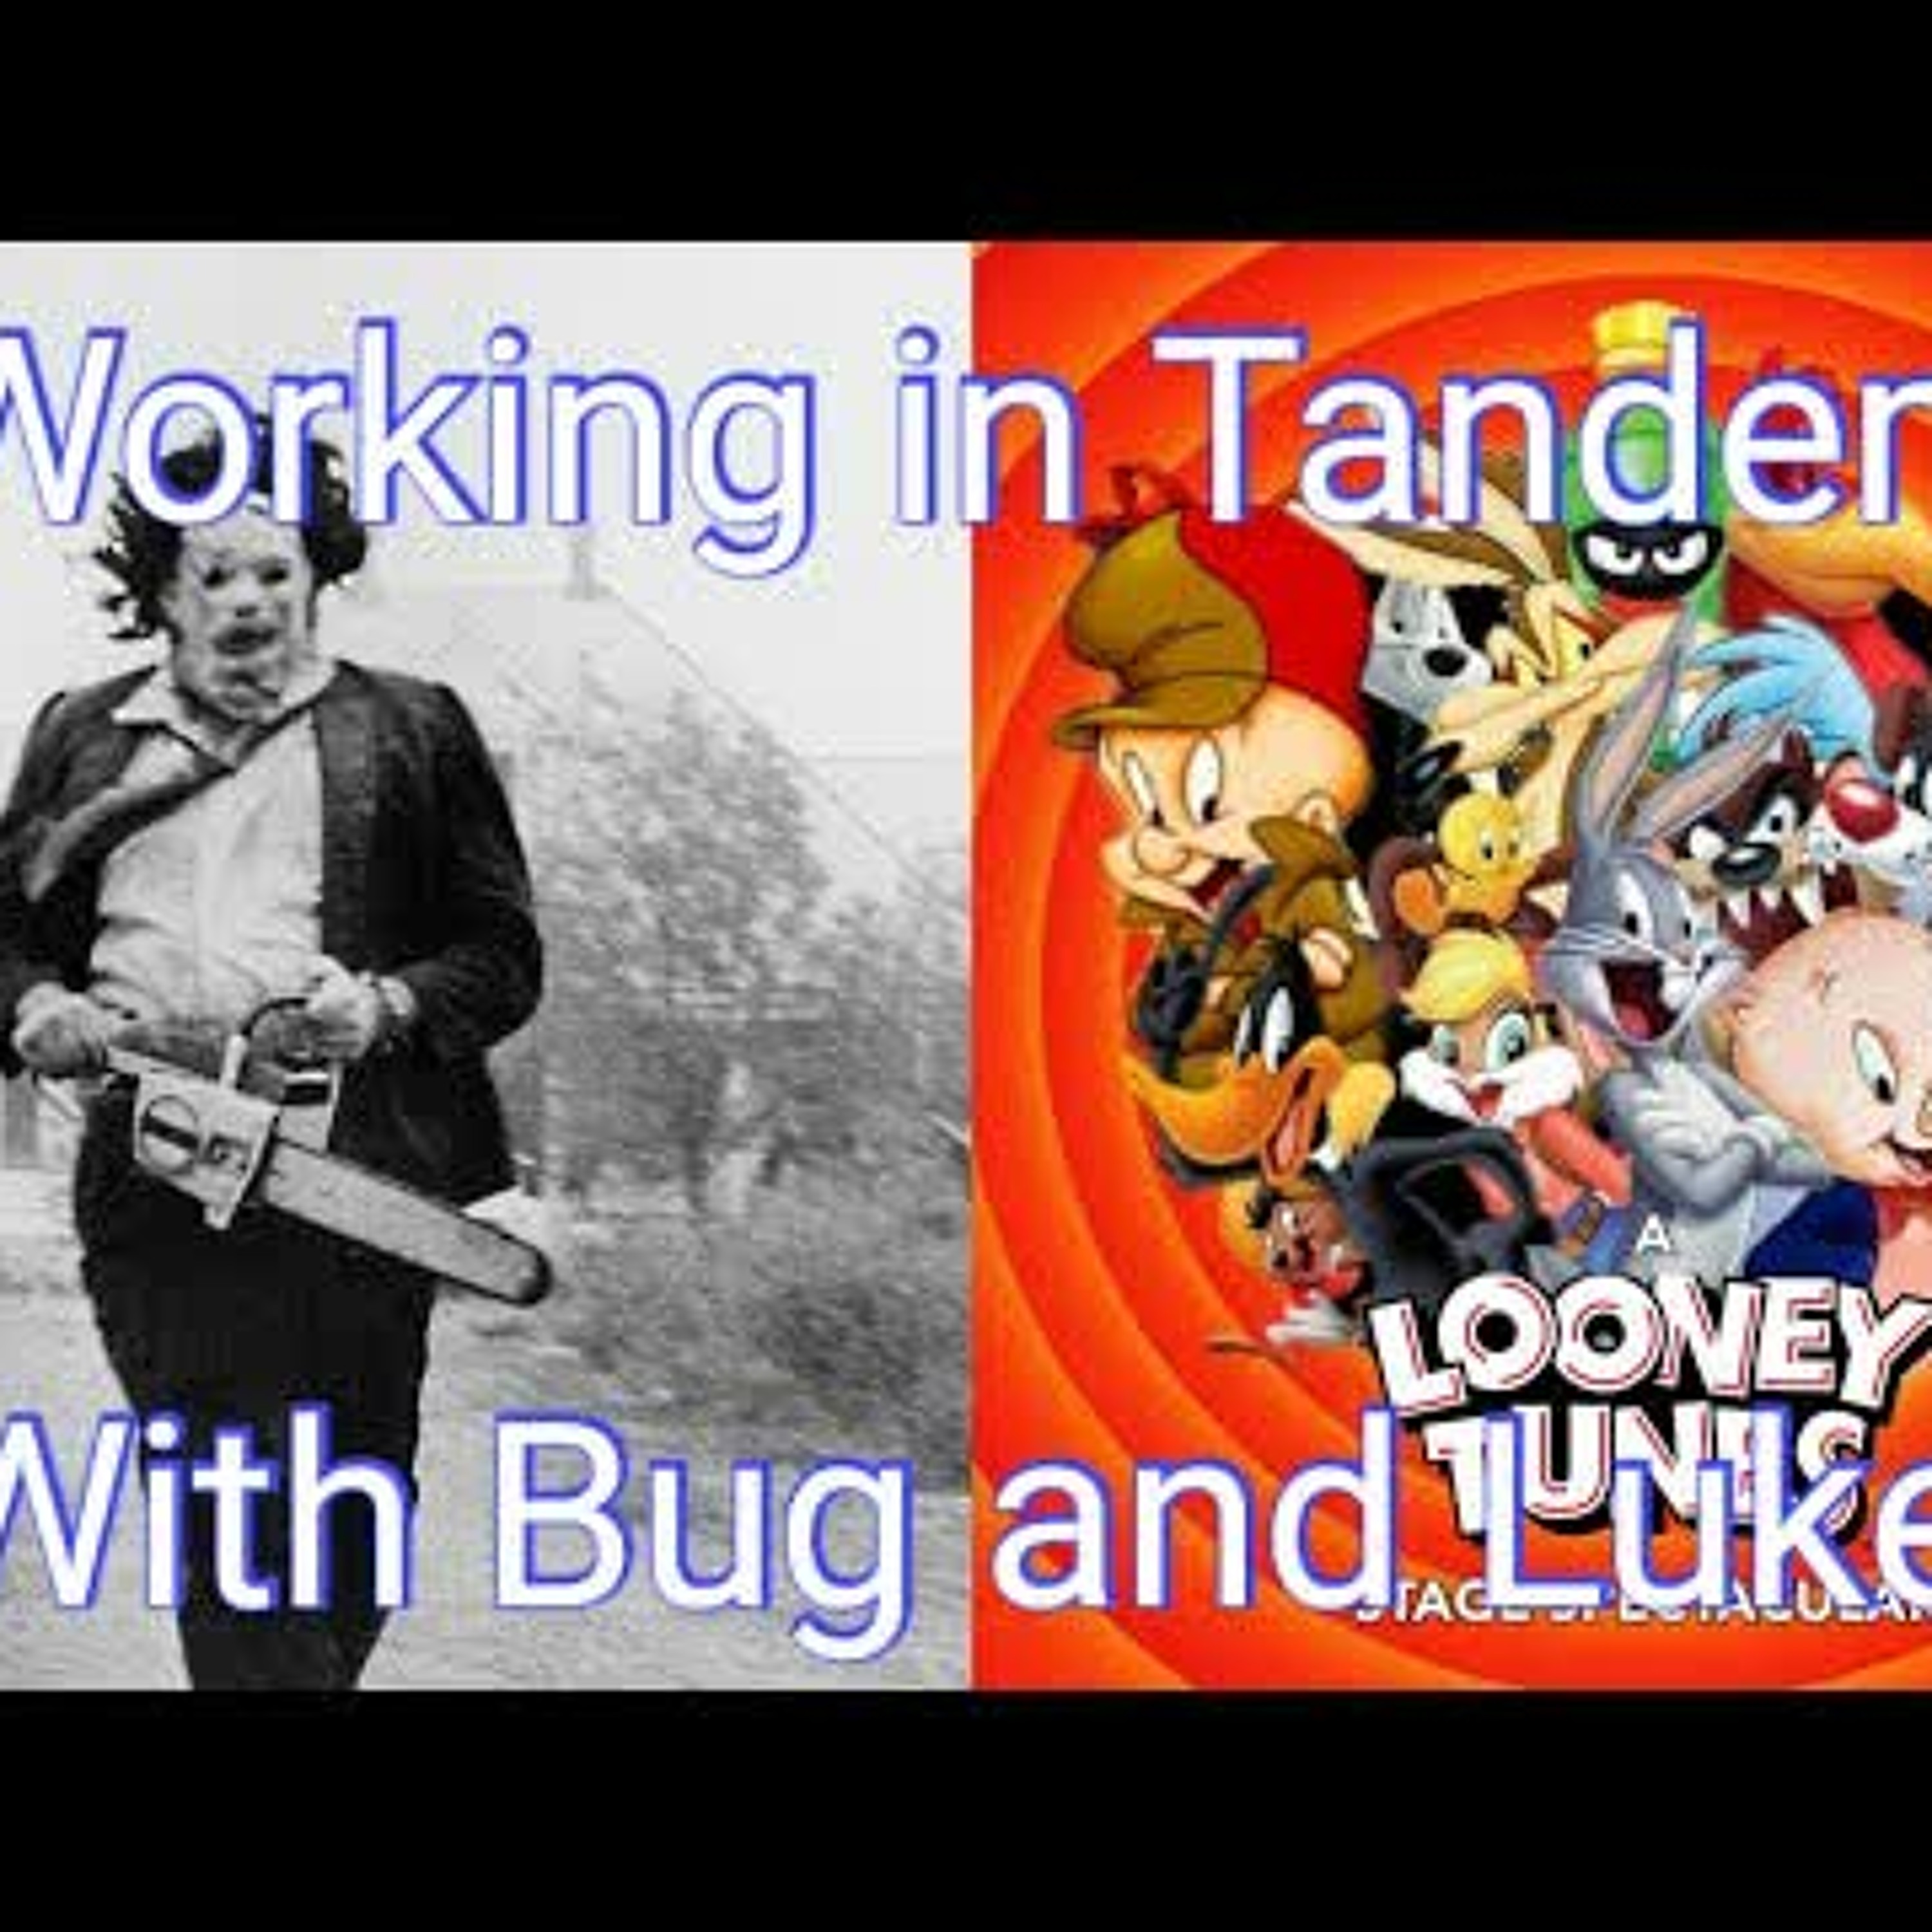 Ep 126: Working in Tandem with Bug and Luke